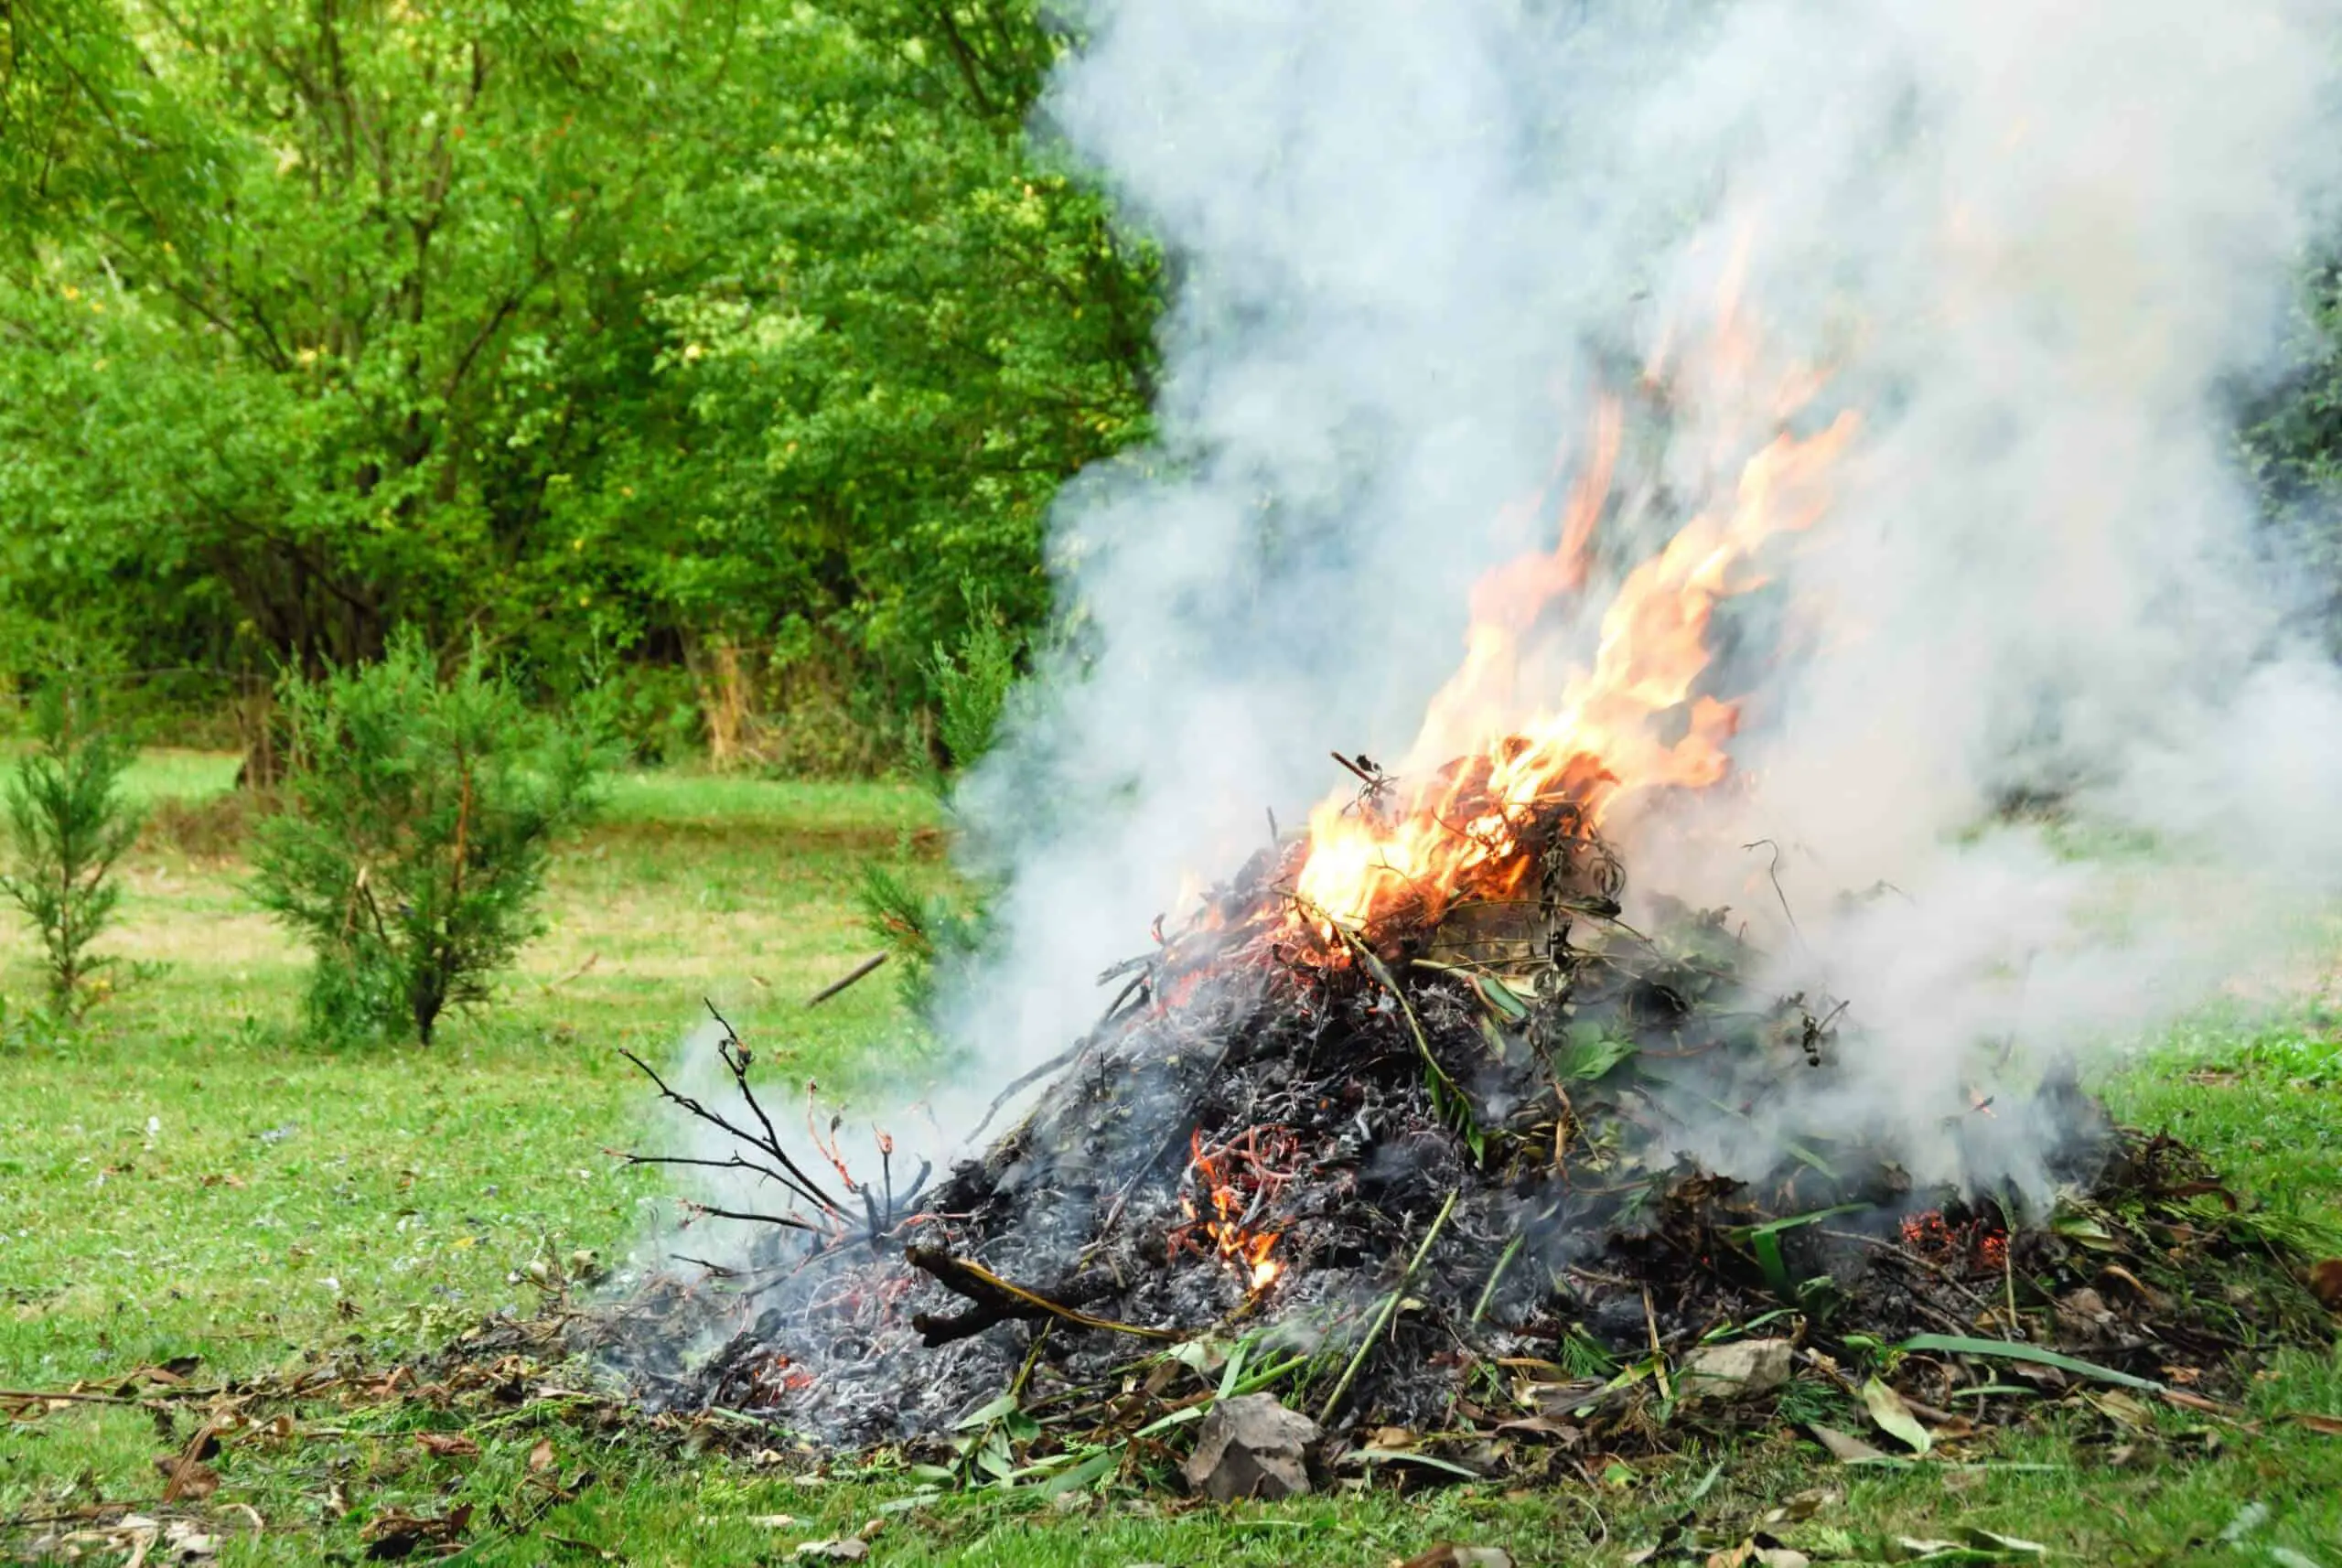 Removing Japanese knotweed by burning to ash